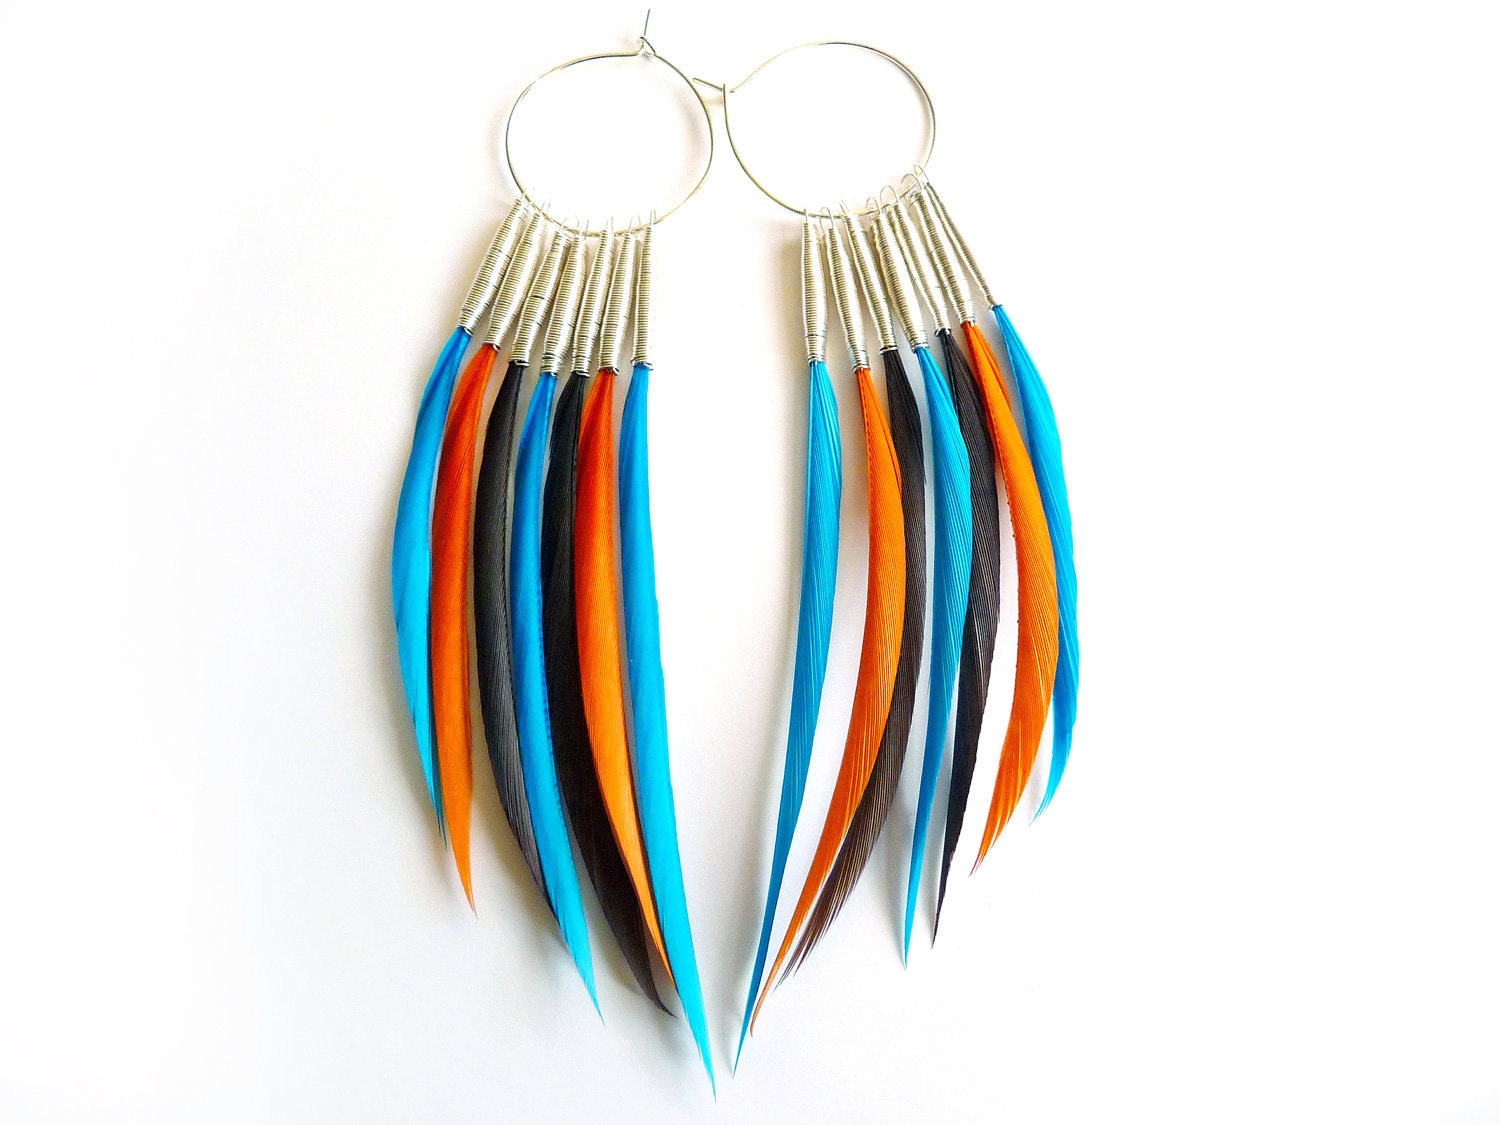 30% OFF - Black Friday SALE - Interchangeable Feather Earrings in Turquoise, Orange and Brown